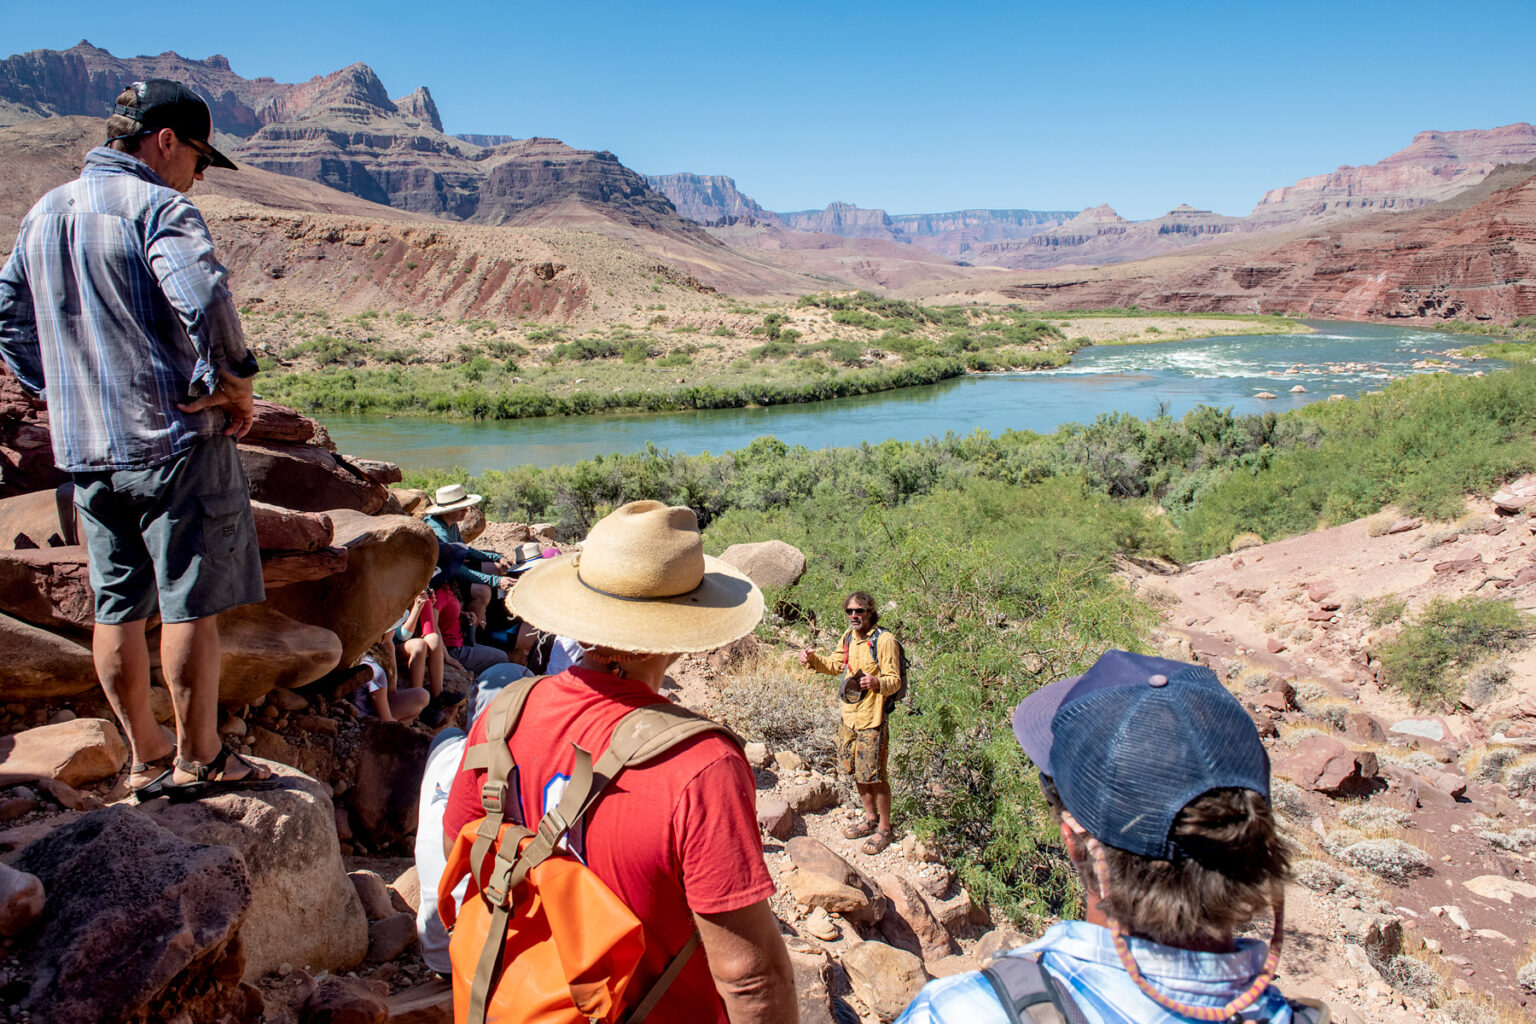 Guests sit and stand around a rocky ledge as a guide gives a talk above the banks of the Colorado River in Grand Canyon